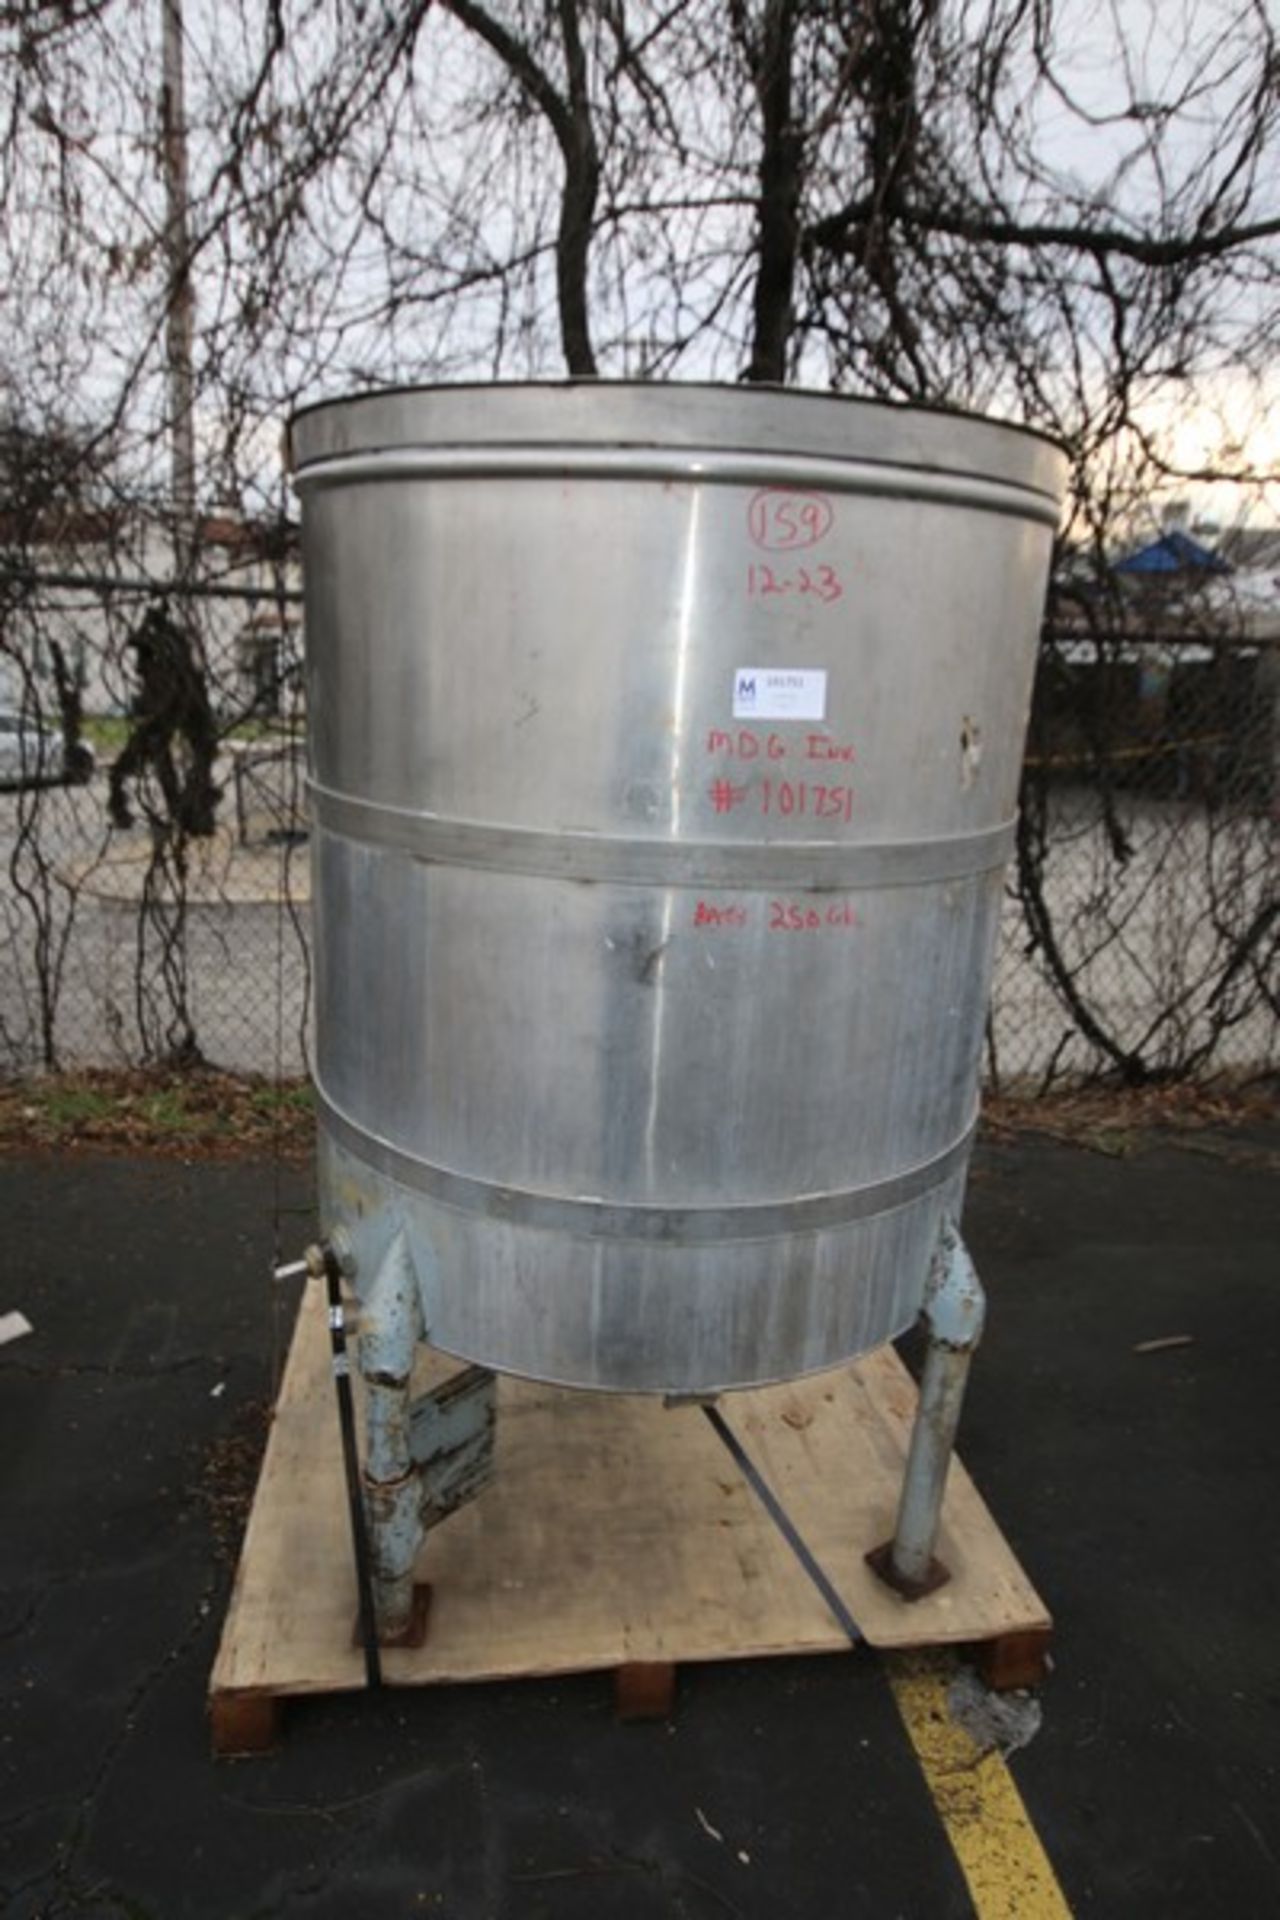 Aprox. 250 Gallon S/S Vertical Tank with Open Top, 2" Bottom Connection, Steel Legs (INV#101751) (